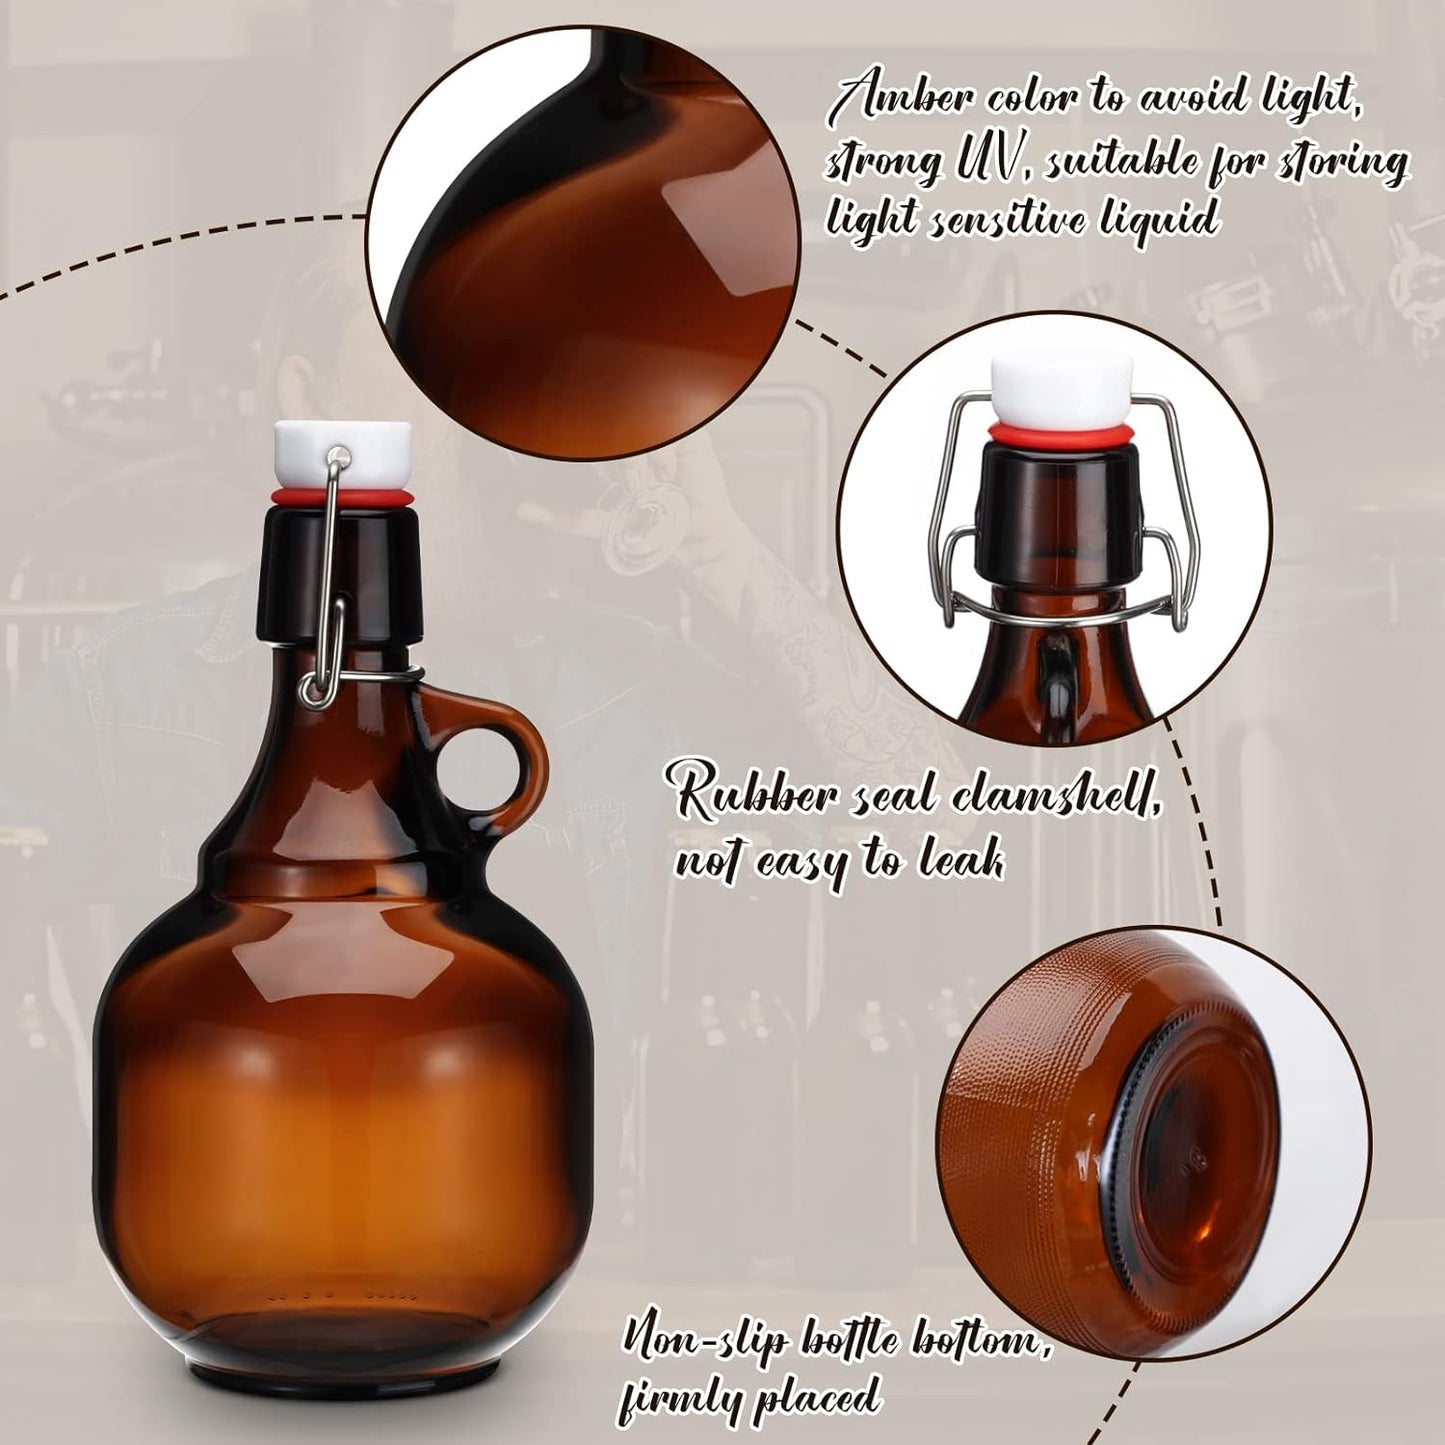 4 Pcs Growlers for Beer Amber Glass Bottles Beer Bottles Glass Jar with Lid Glass Jugs Soda Cider Alcohol Wine Home Brewing Fermenting (34 oz)